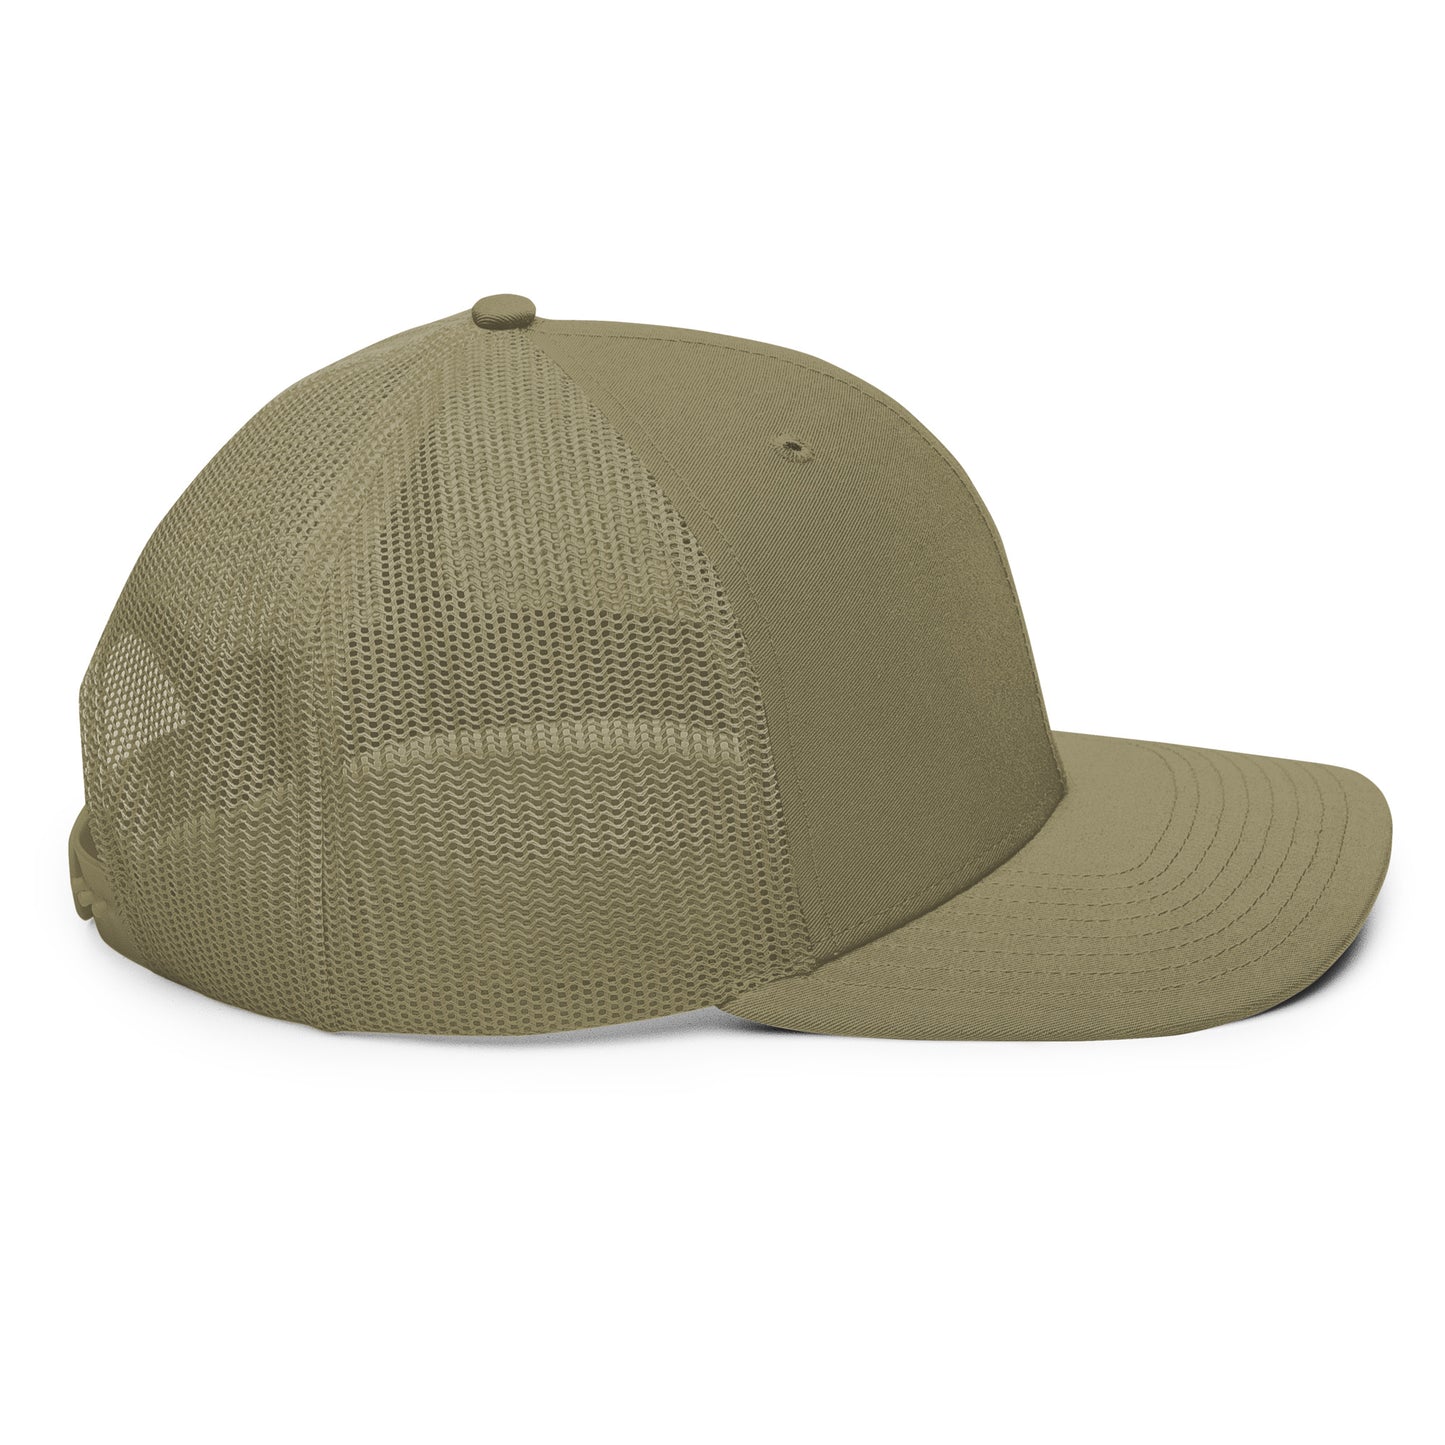 a khaki colored hat with a mesh front